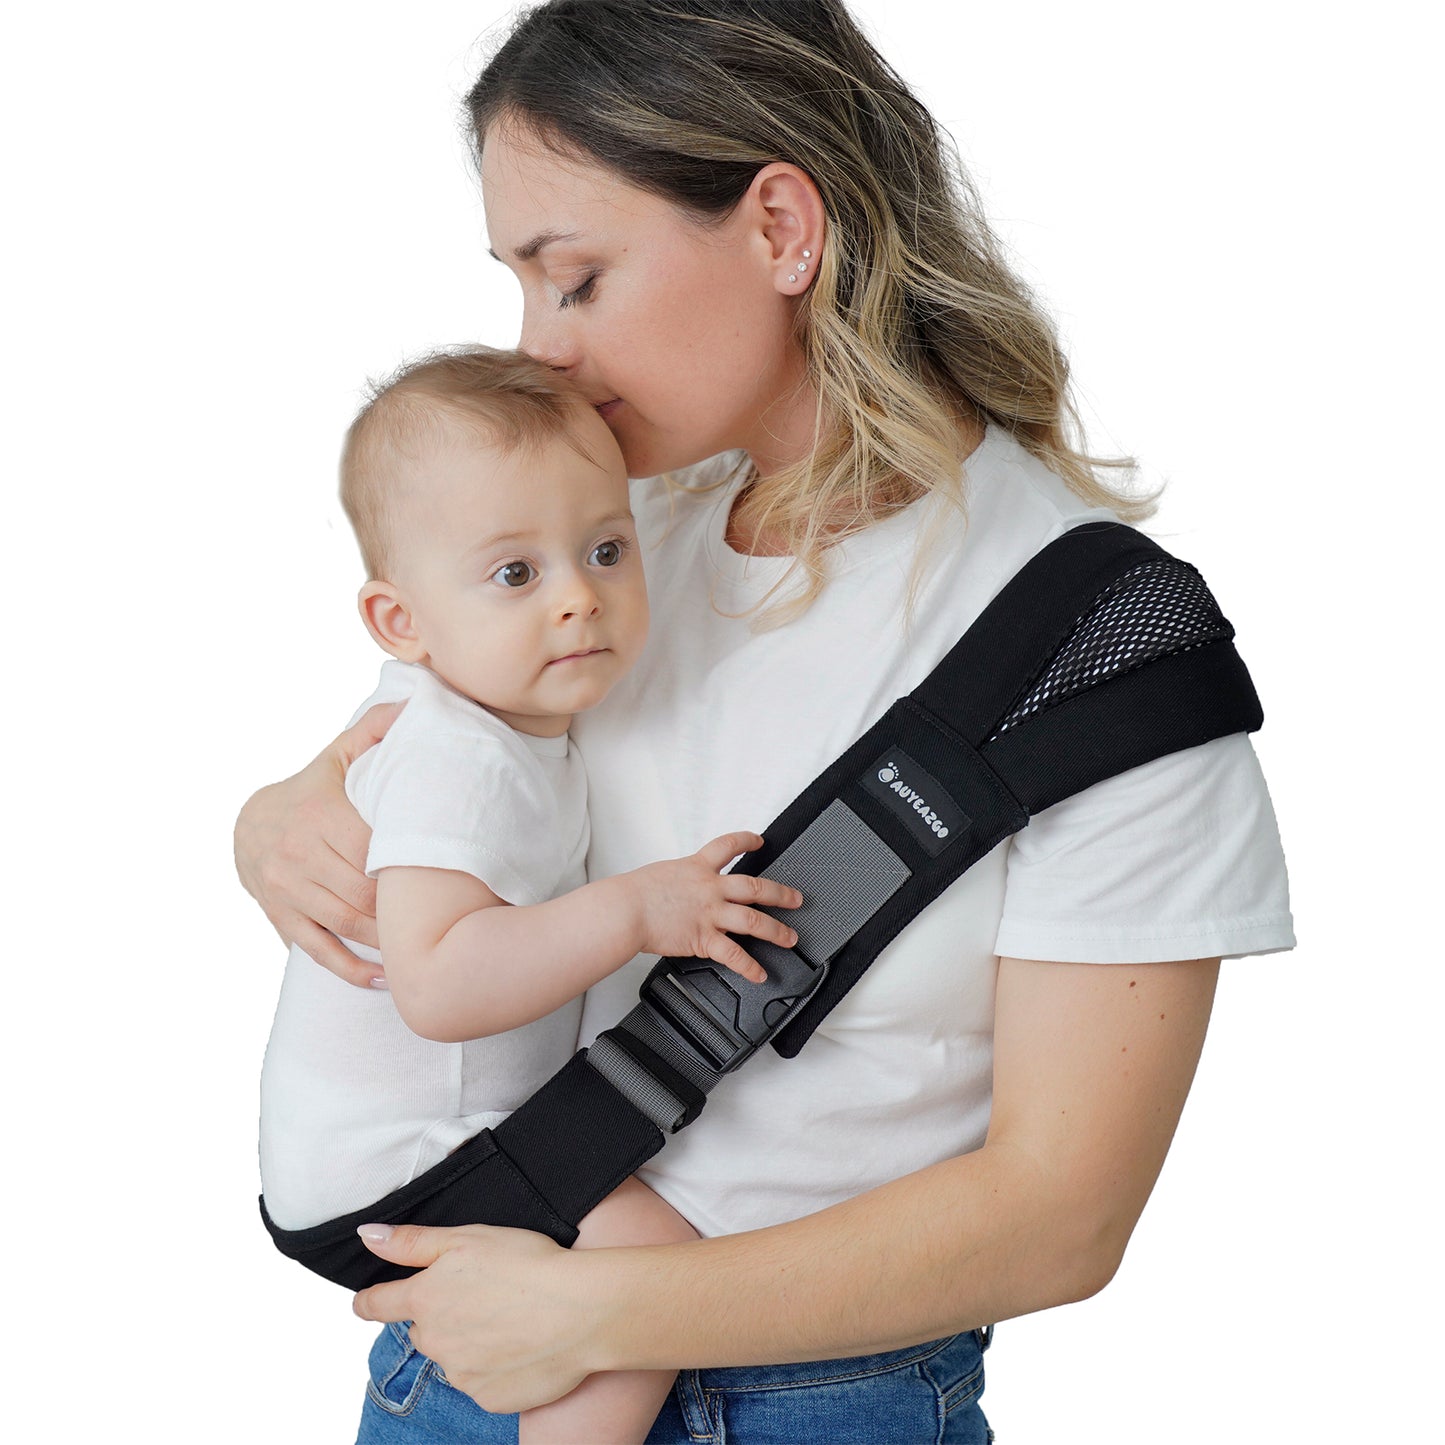 Toddler Sling, AUYEAZGO Ergonomic Baby Sling with Adjustable Strap, Soft Padding & Non-Slip Hip Seat, Perfect for Infant and Toddler(7-44 lbs), Premium Cotton, Steel Gray